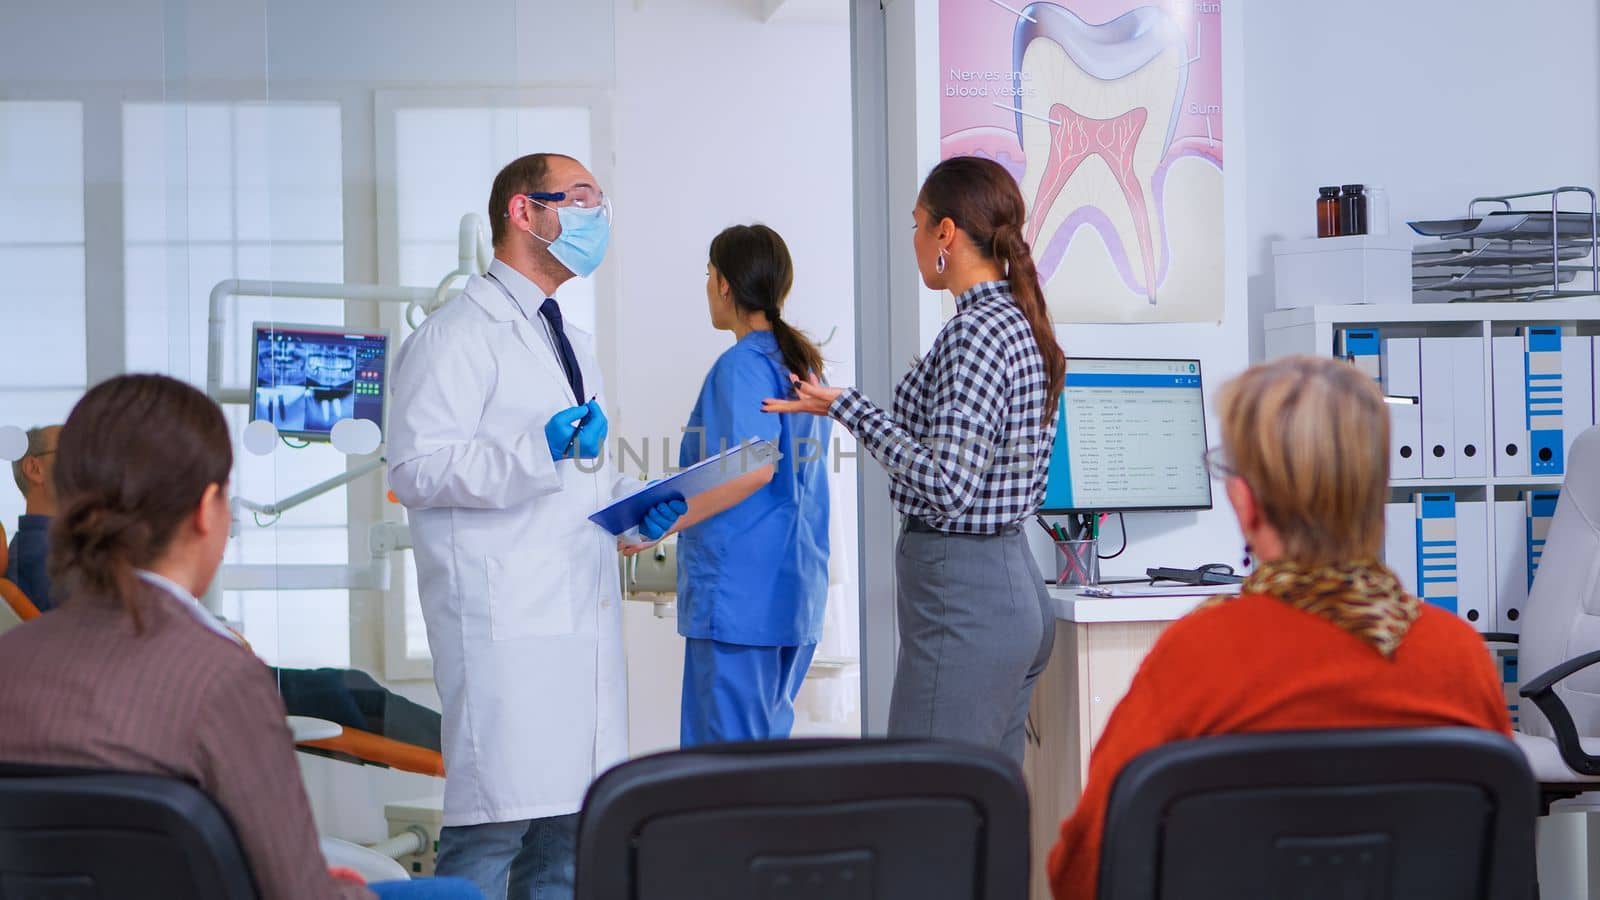 Doctor taking notes on clipboard about woman dental problems standing in waiting area, while nurse preparing tools for next patient in consultation room. Dentist explaining medical procedure.